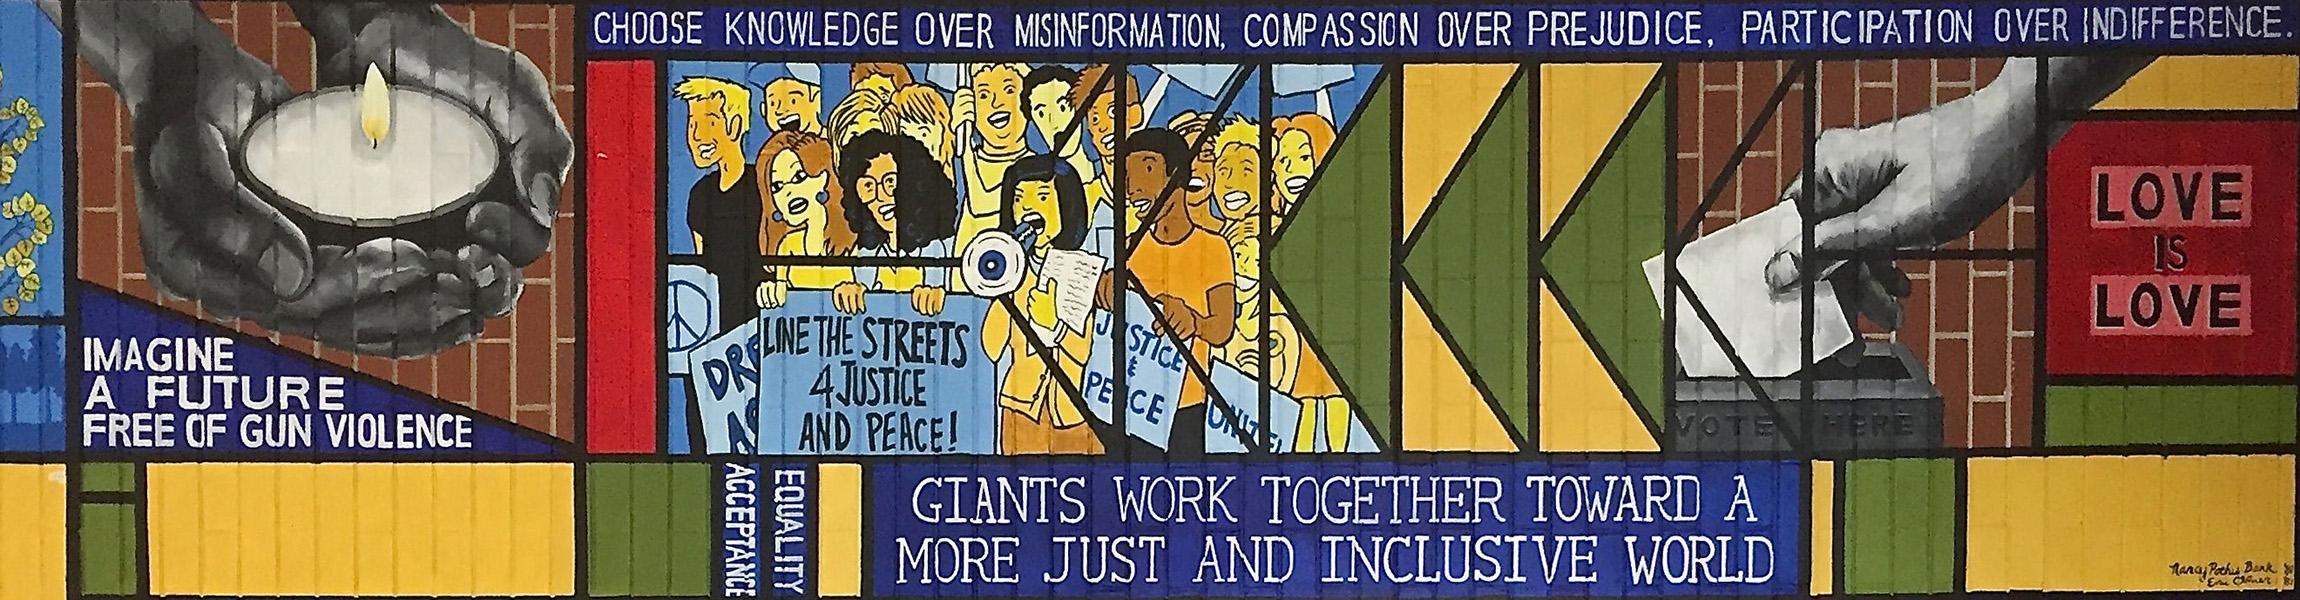 A social justice mural in at Highland Park High School in Illinois; the mural evokes stained glass art of Frank Lloyd Wright